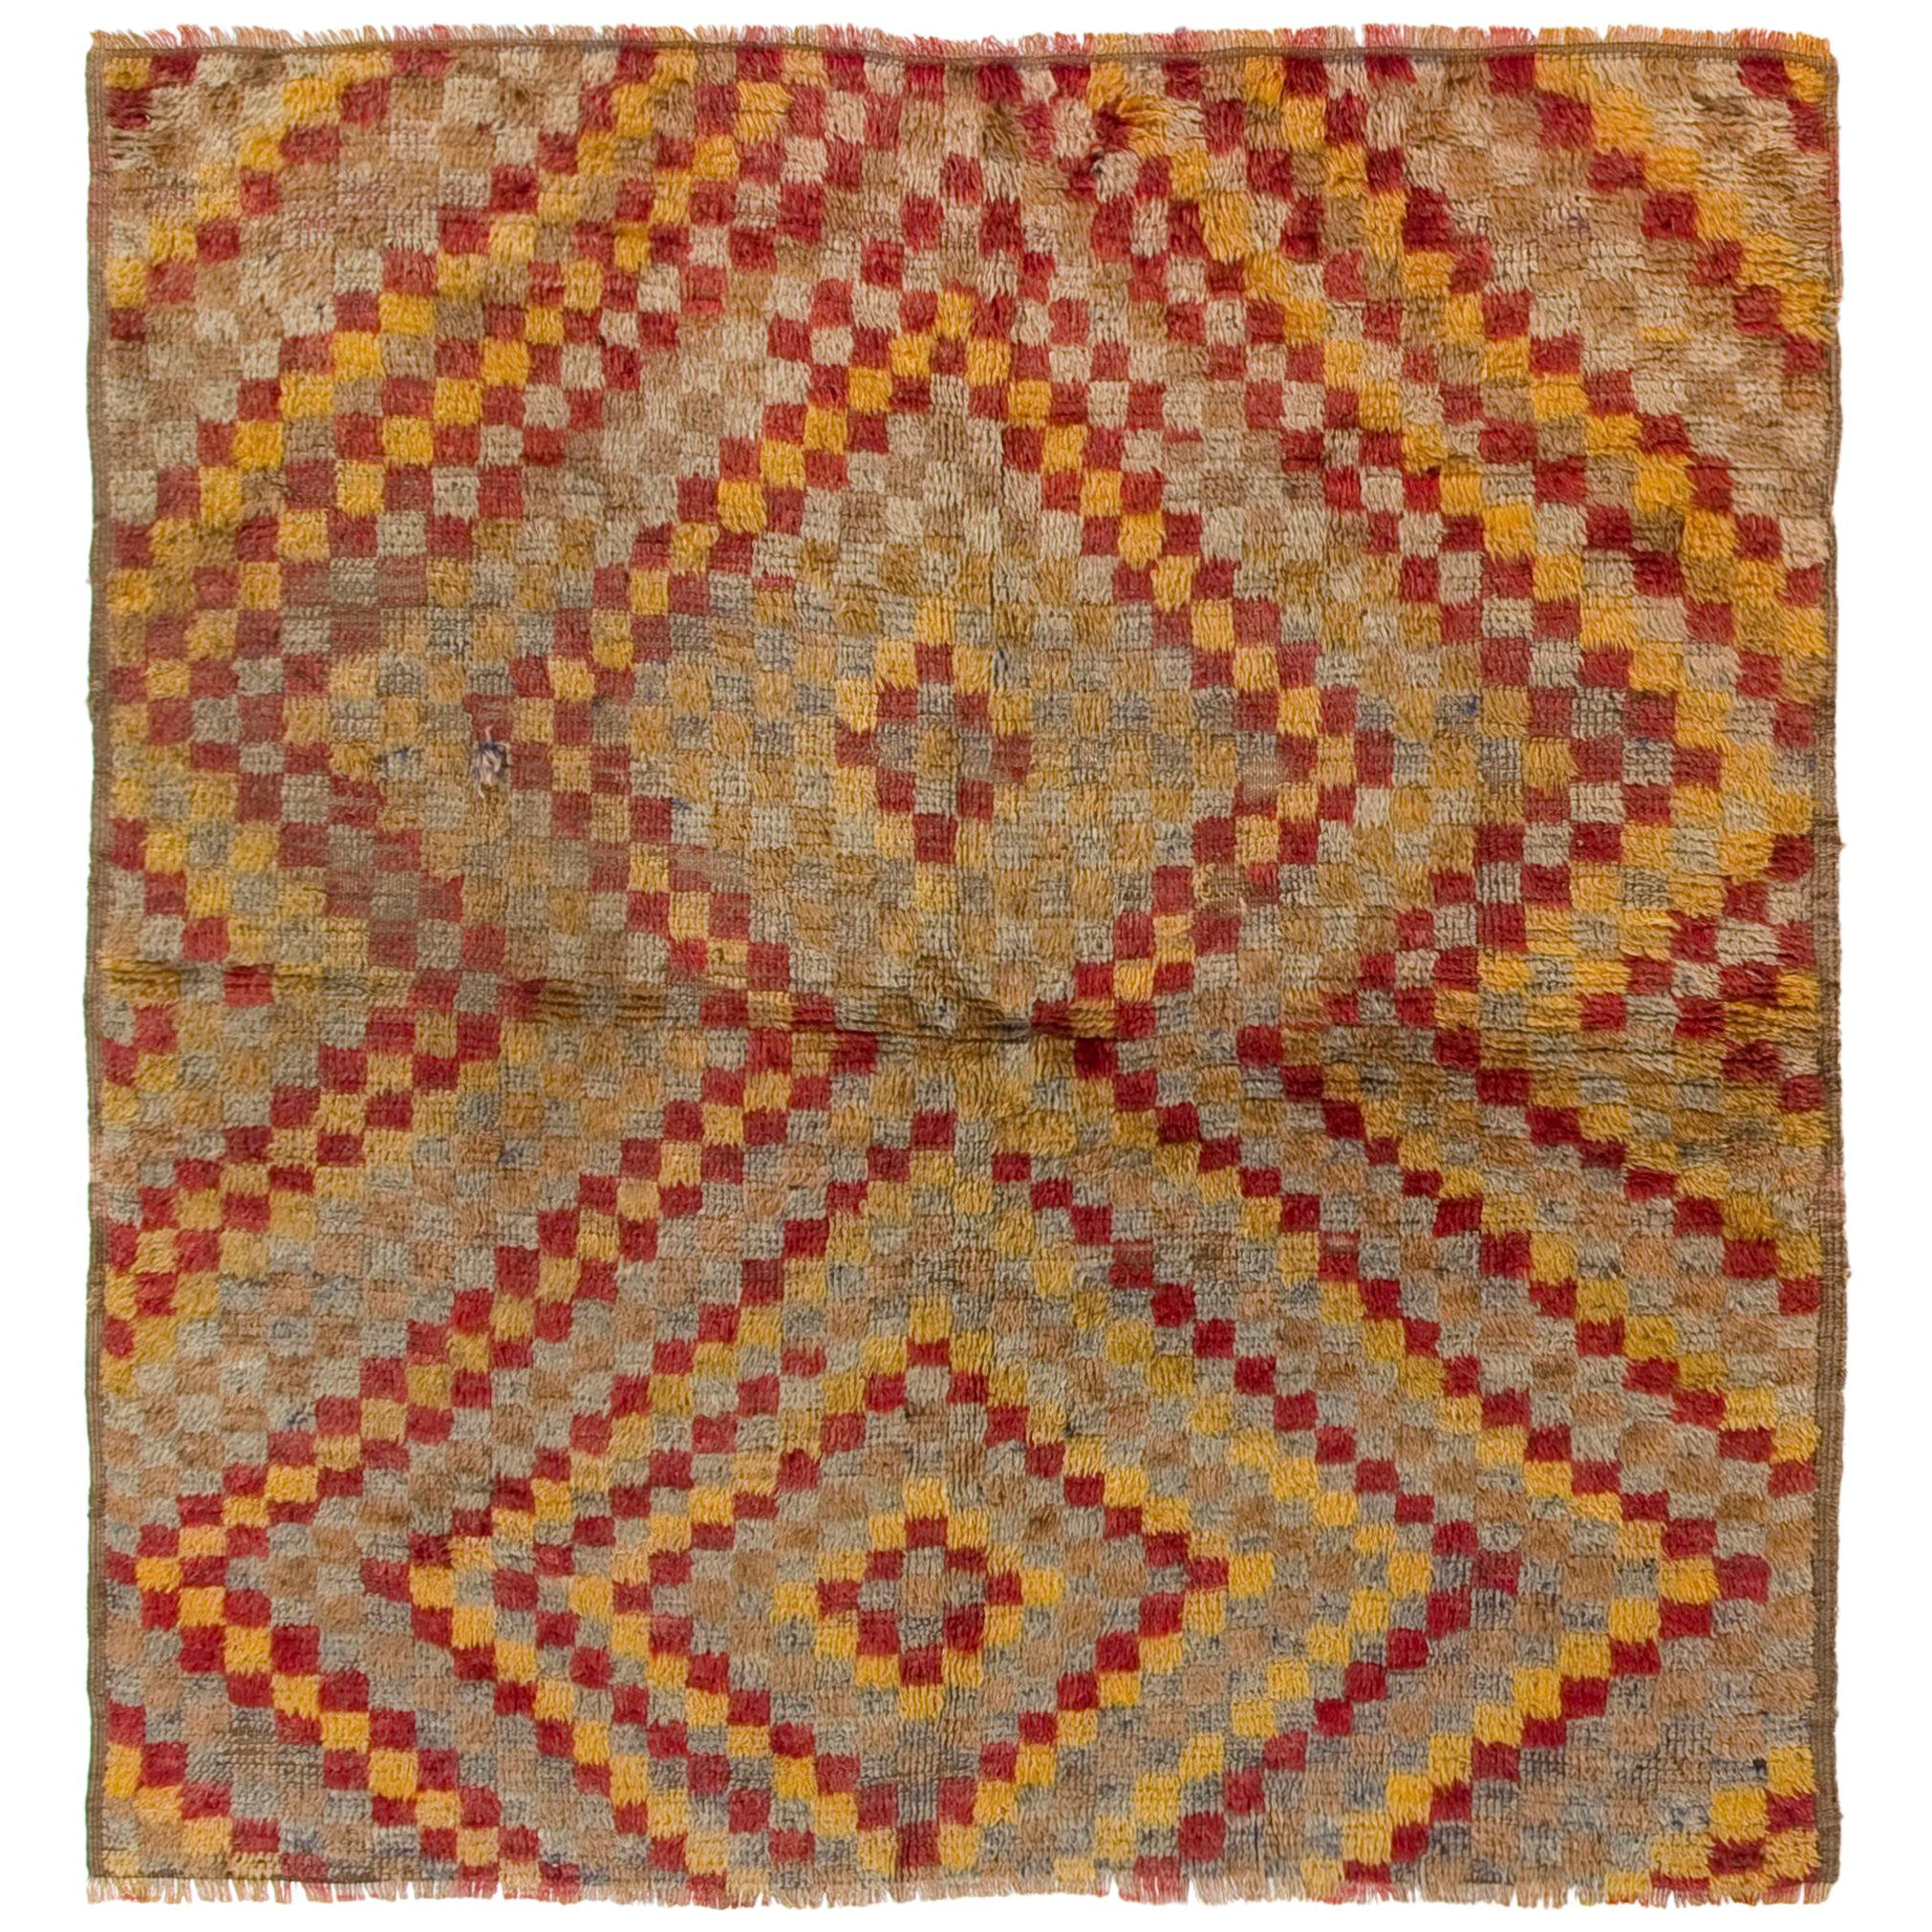 4x4.2 Ft Colorful Mid-Century Anatolian Tulu Rug, 100% Wool Hand-Knotted Carpet For Sale